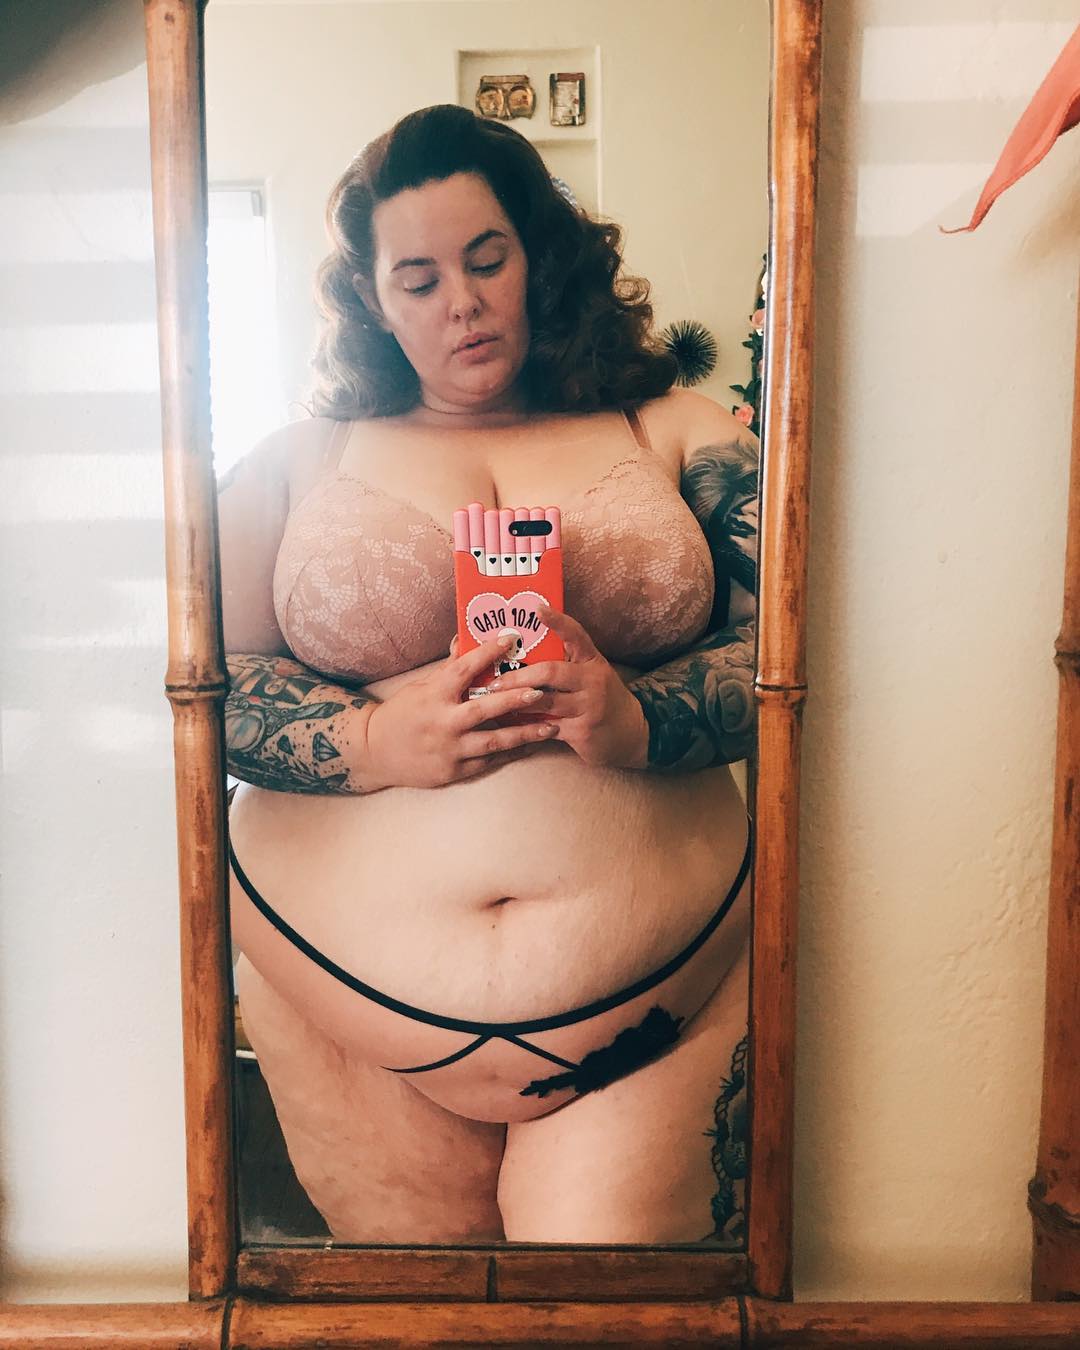 Obese model is declared "fit" at 300 pounds.